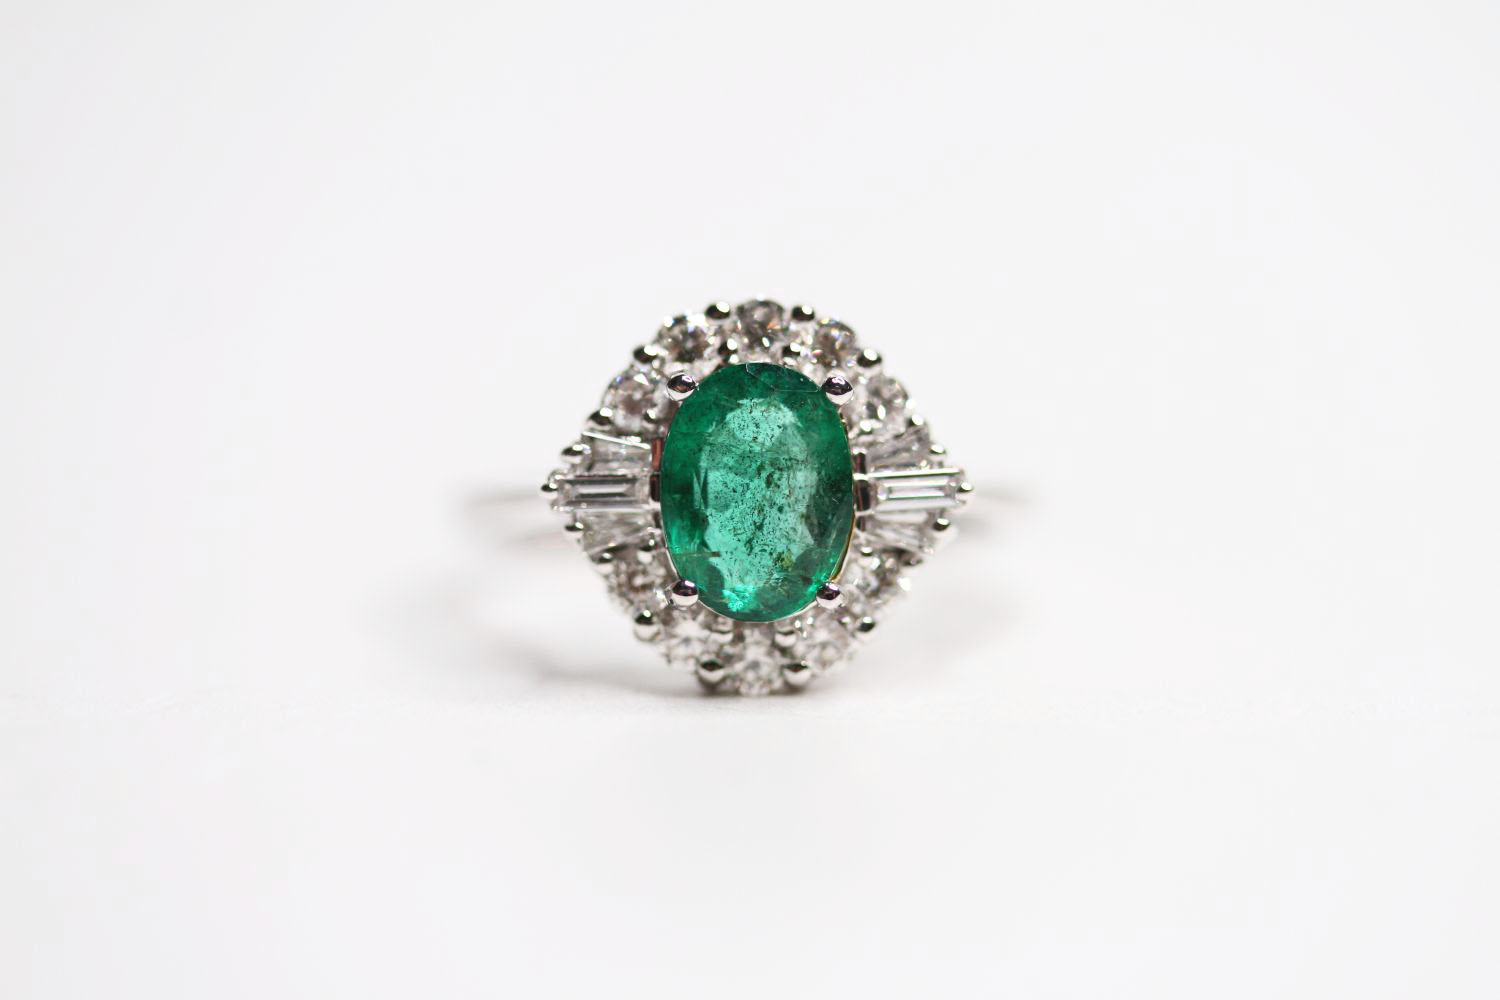 18ct white gold oval emerald and diamond cluster ring. Emerald 1.20ct. RBC and tapered baguette